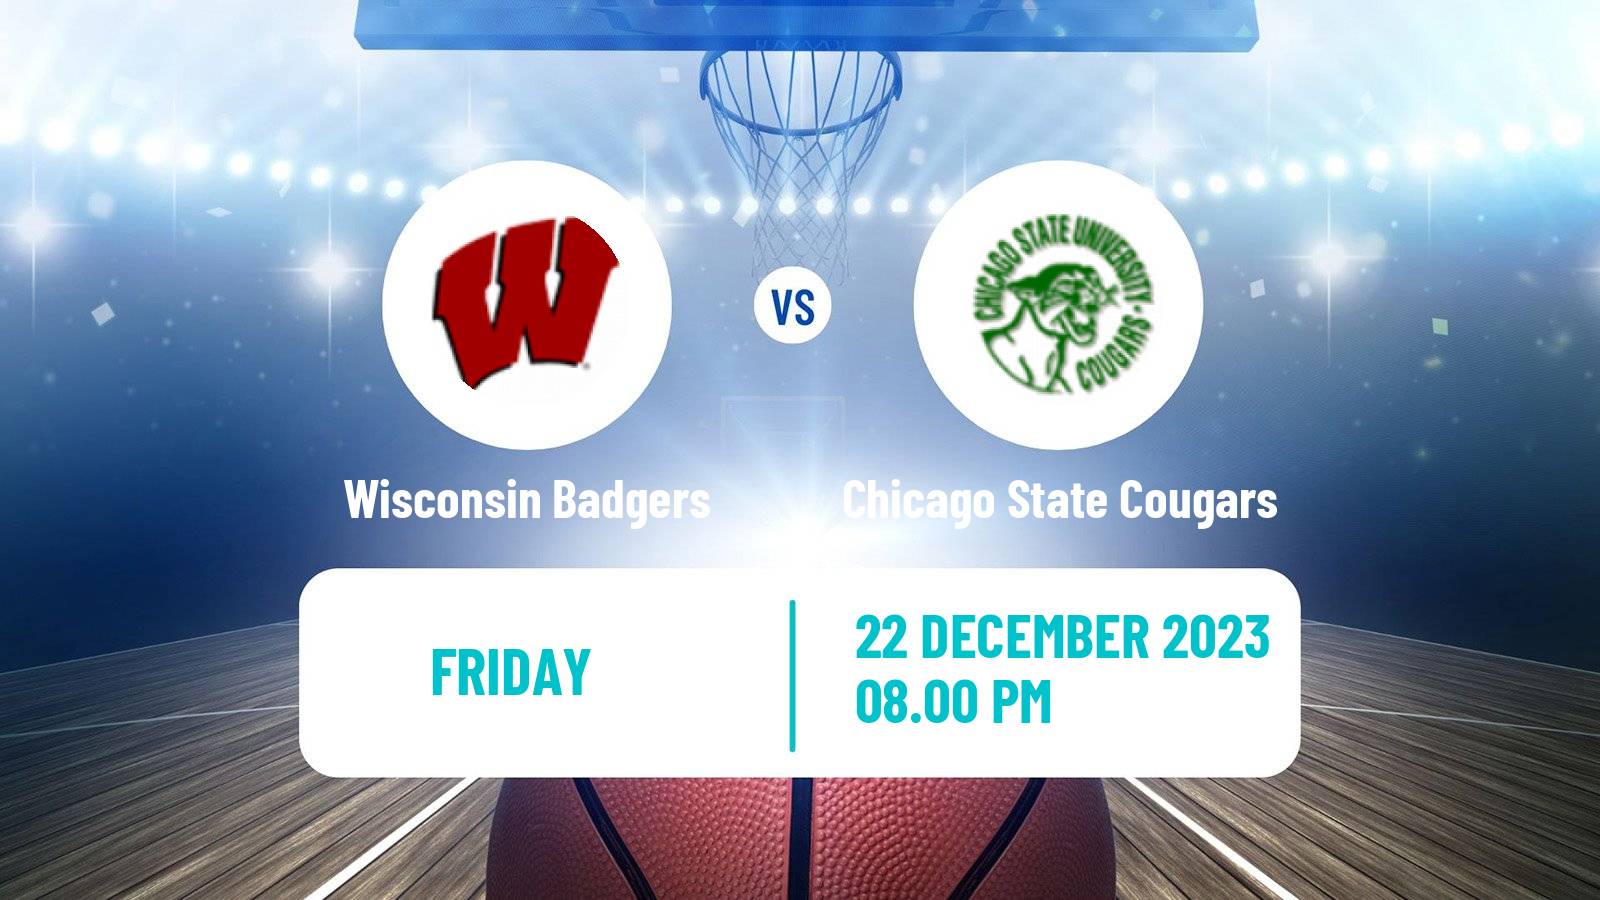 Basketball NCAA College Basketball Wisconsin Badgers - Chicago State Cougars